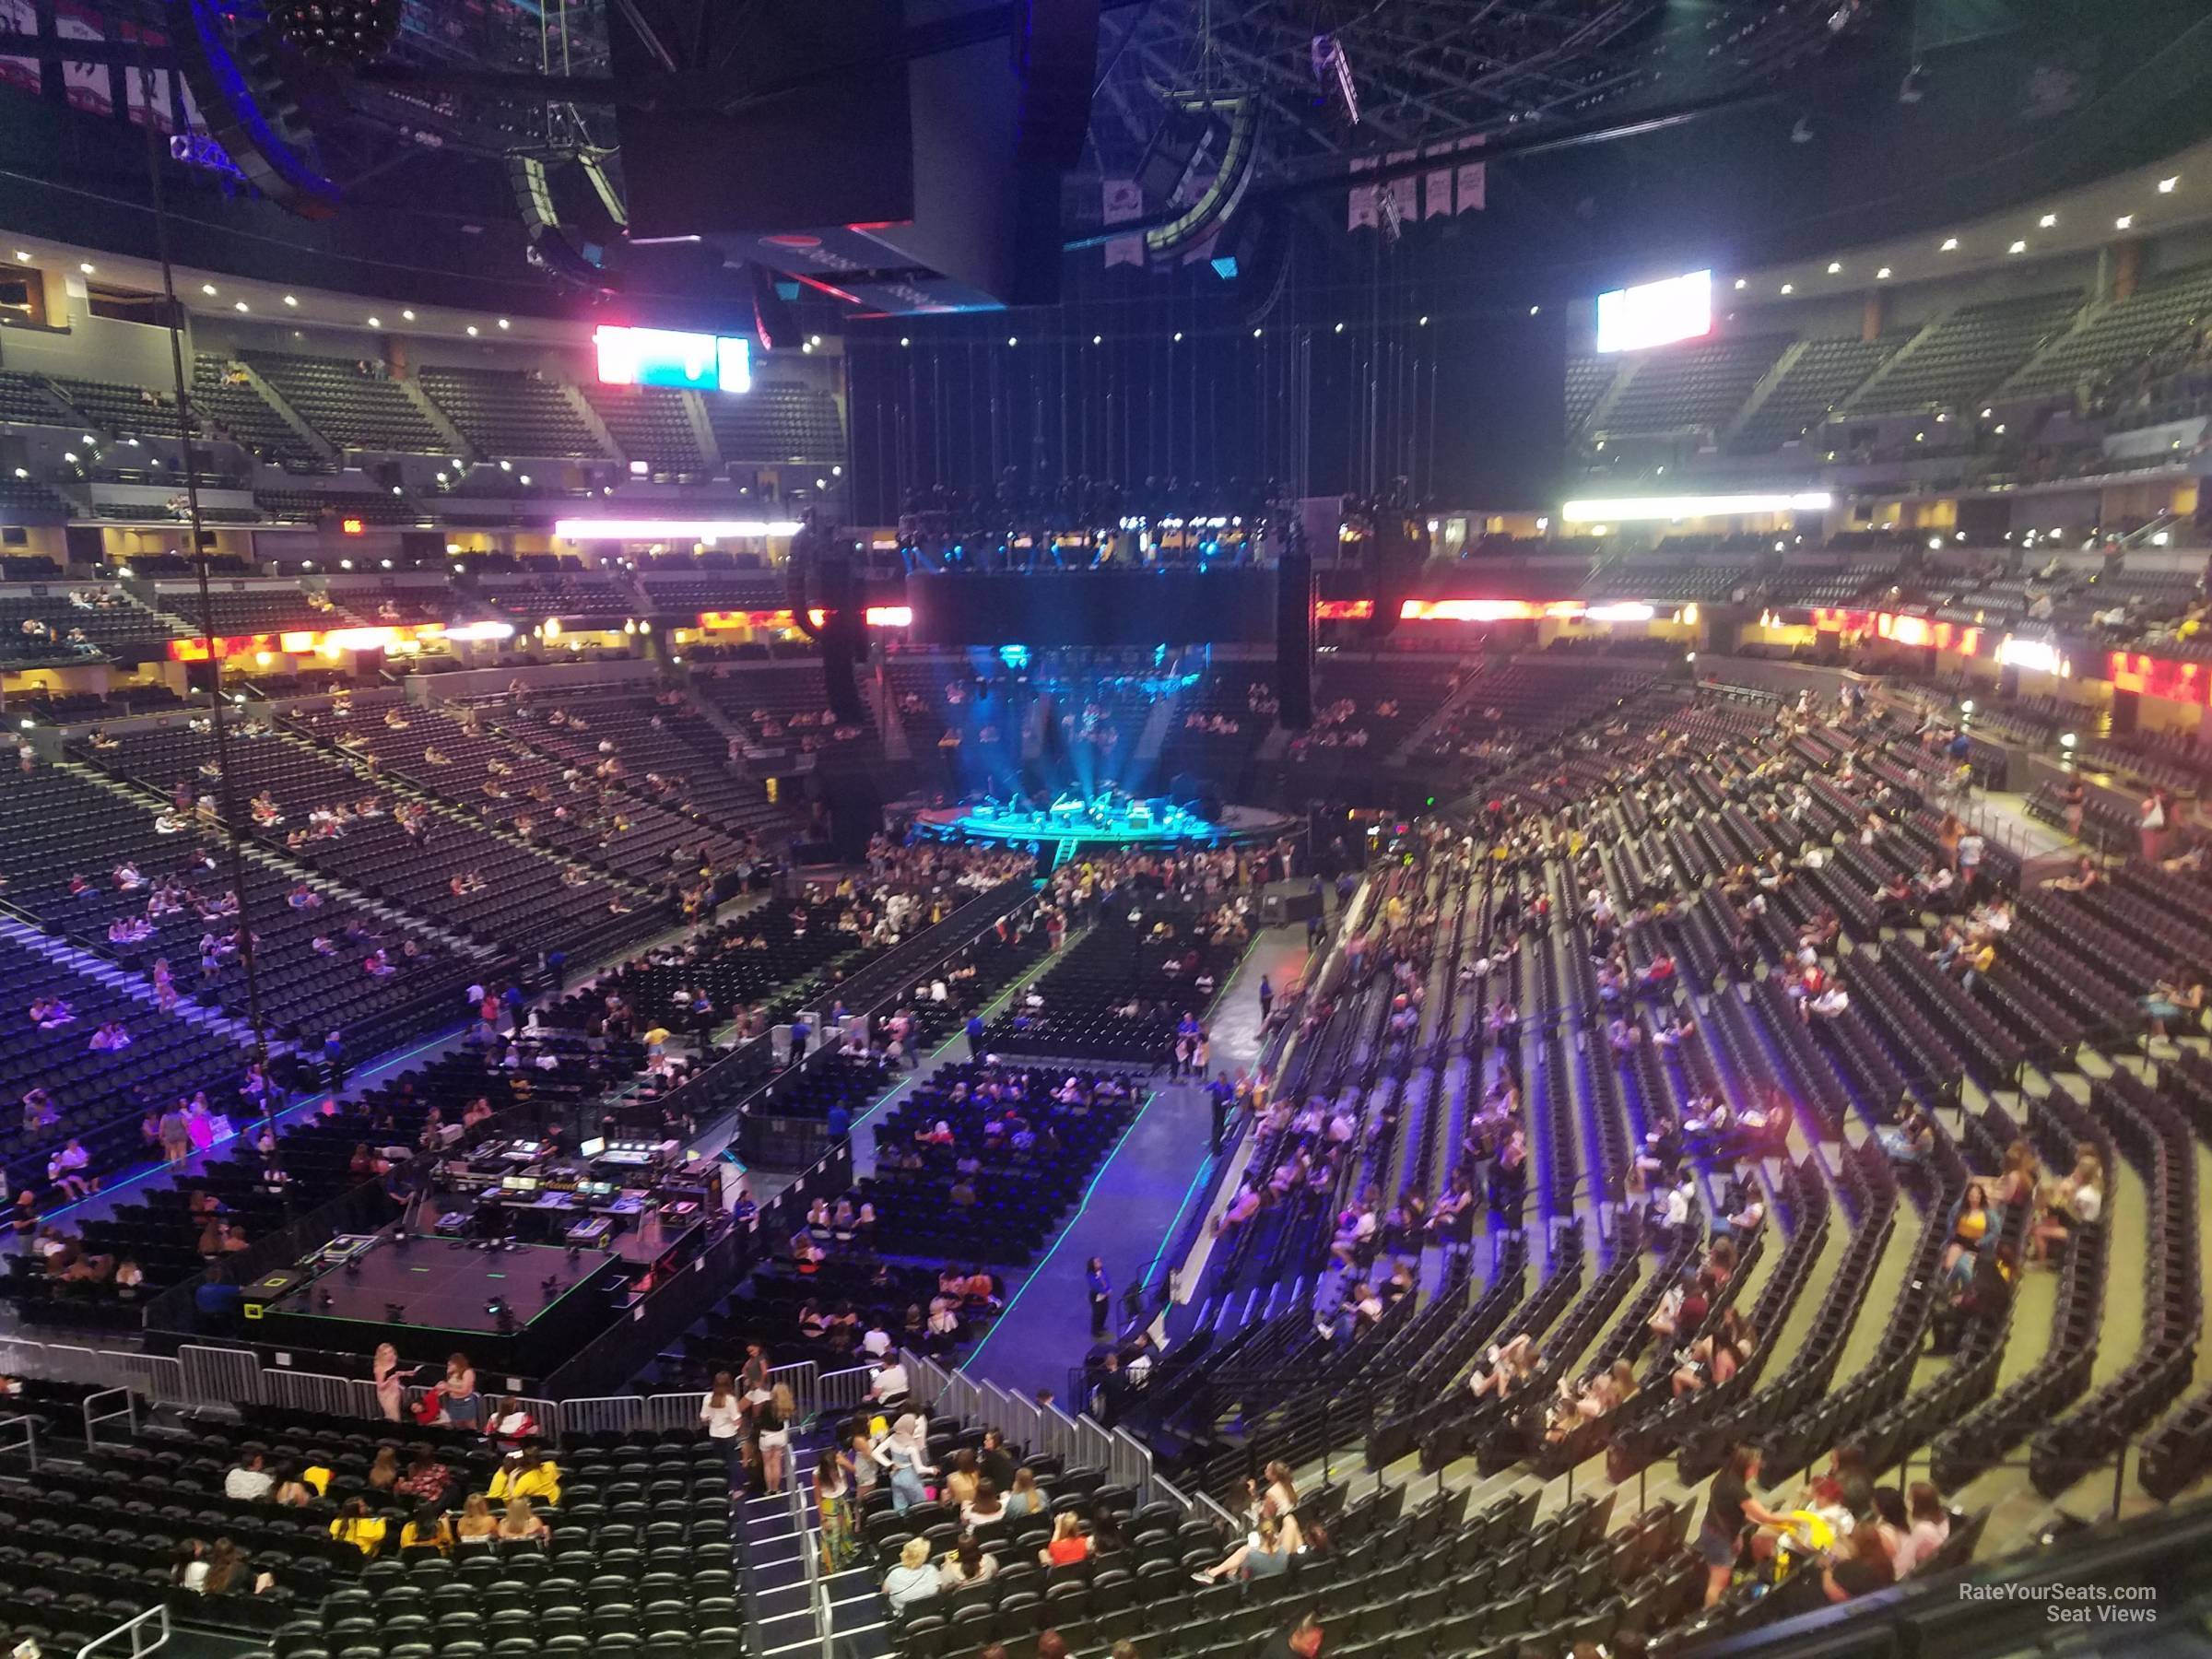 section 212, row 4 seat view  for concert - ball arena